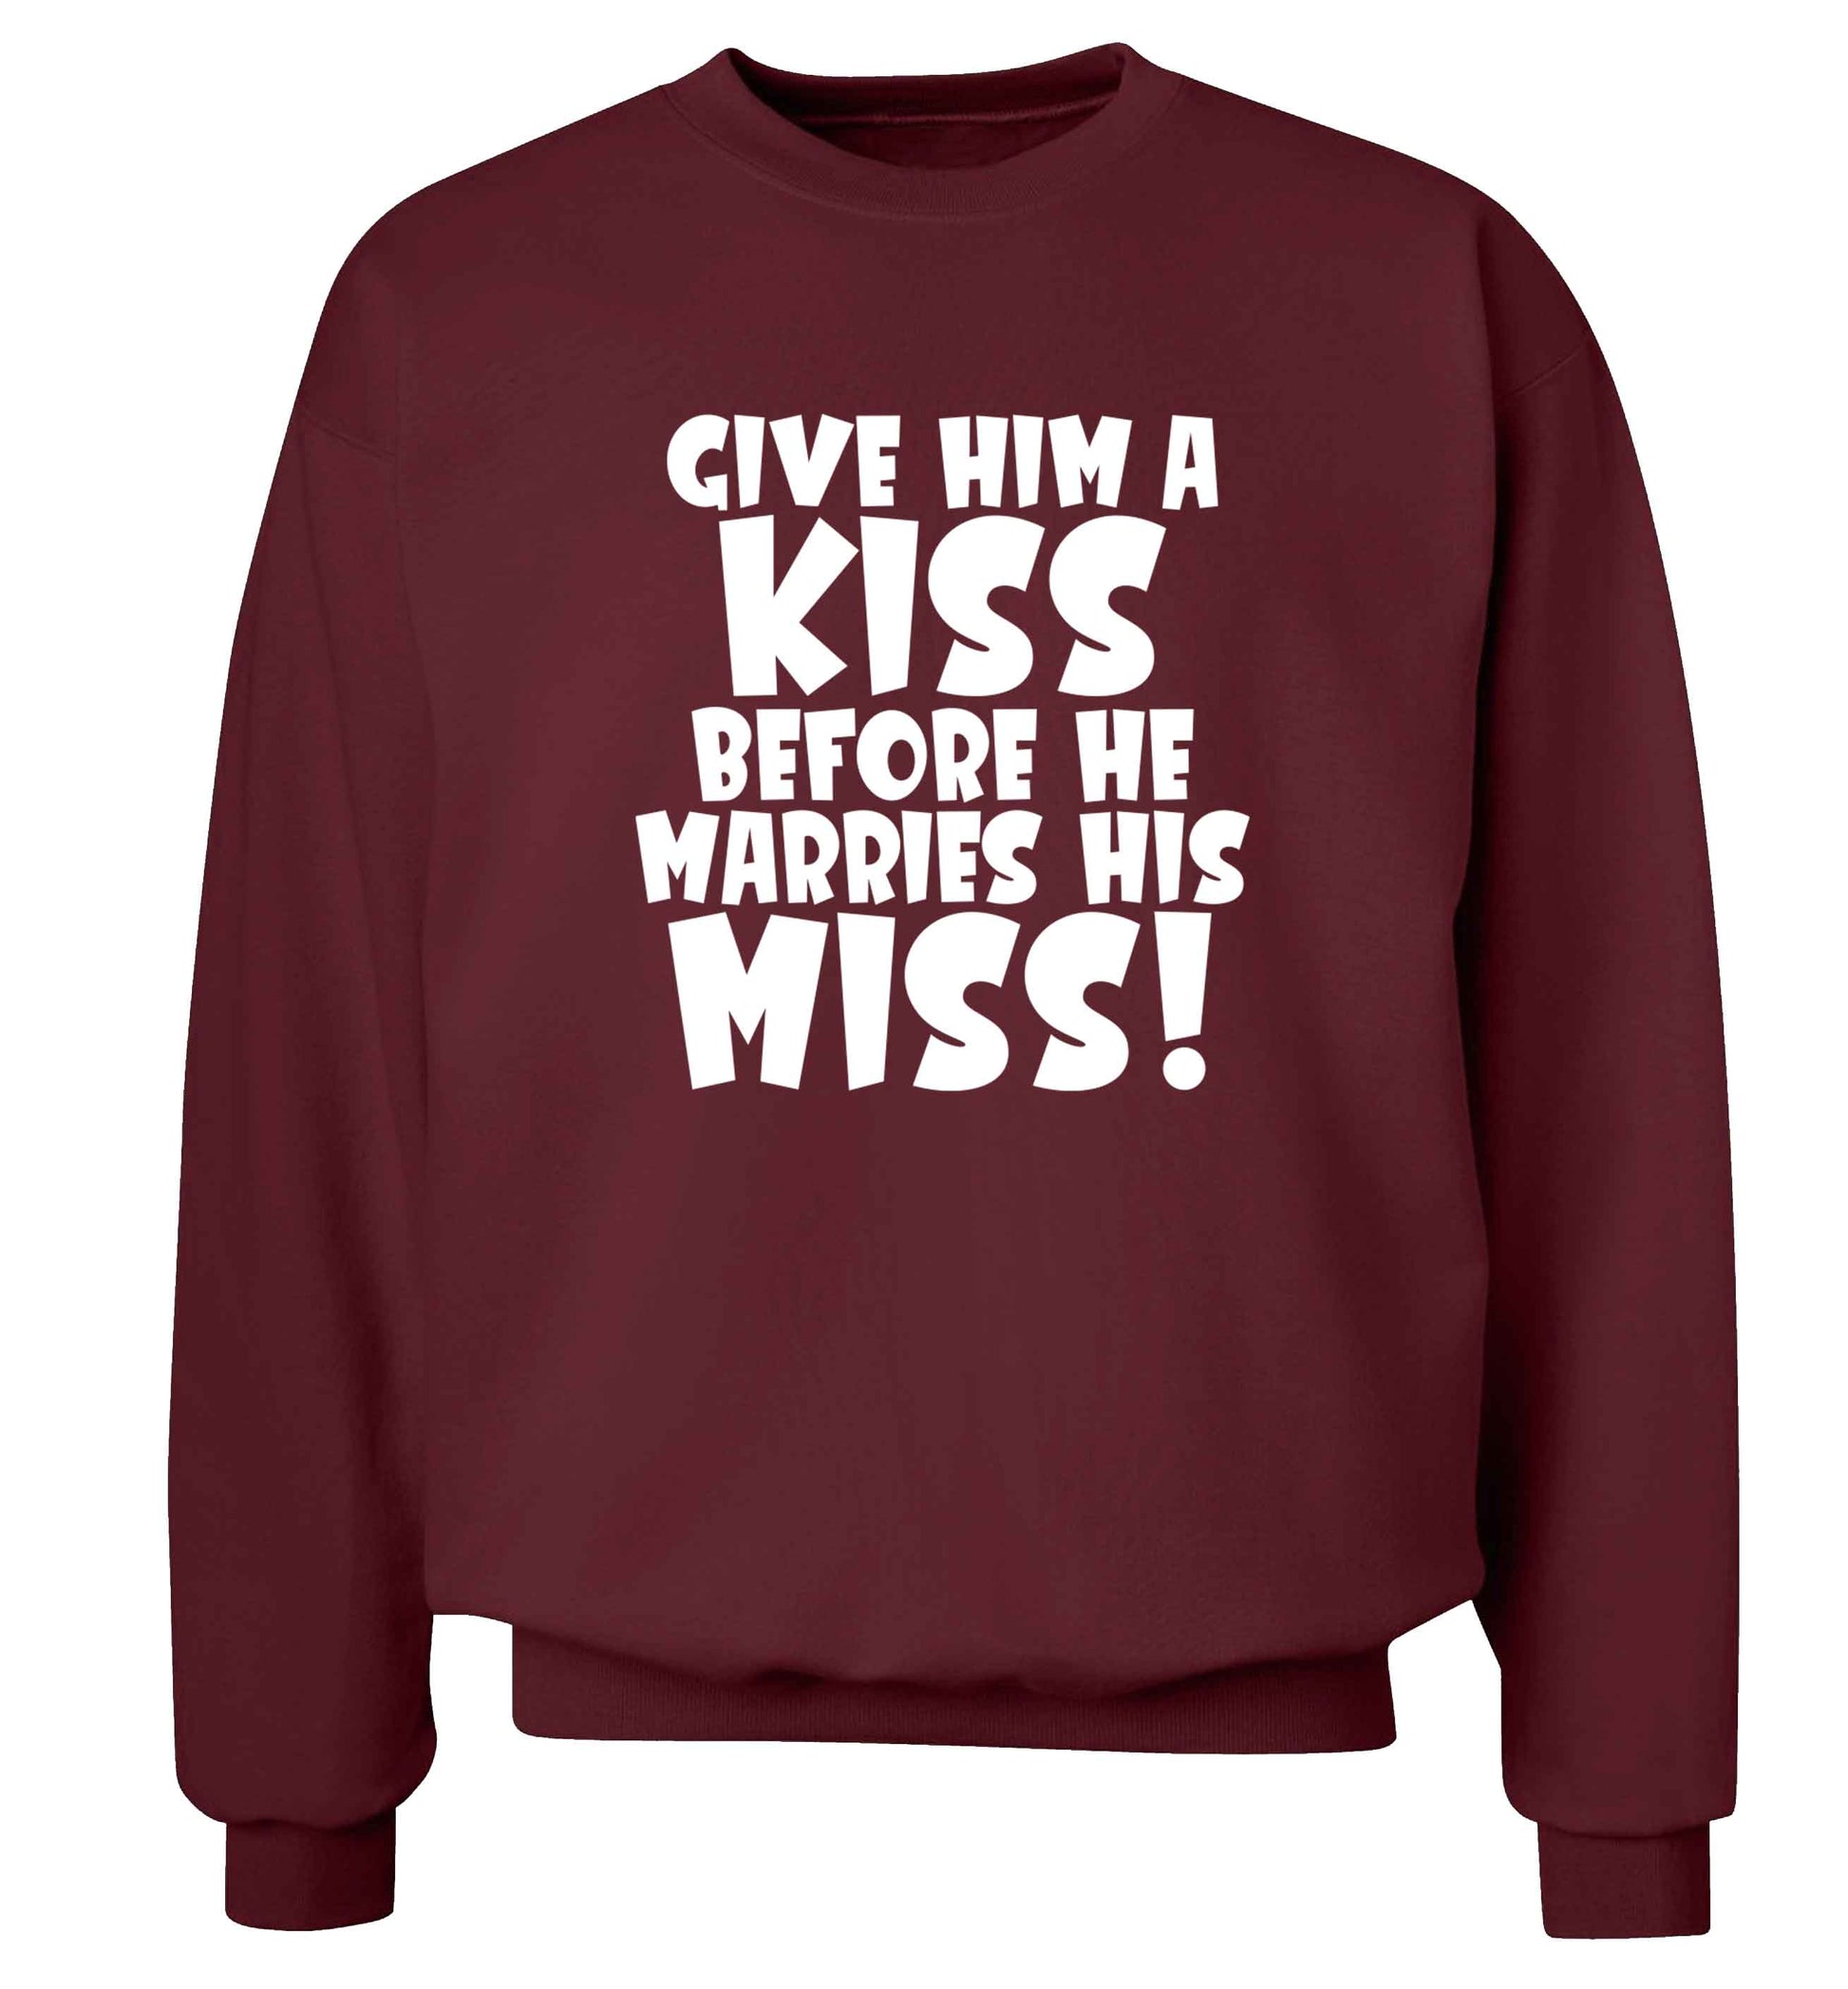 Give him a kiss before he marries his miss adult's unisex maroon sweater 2XL